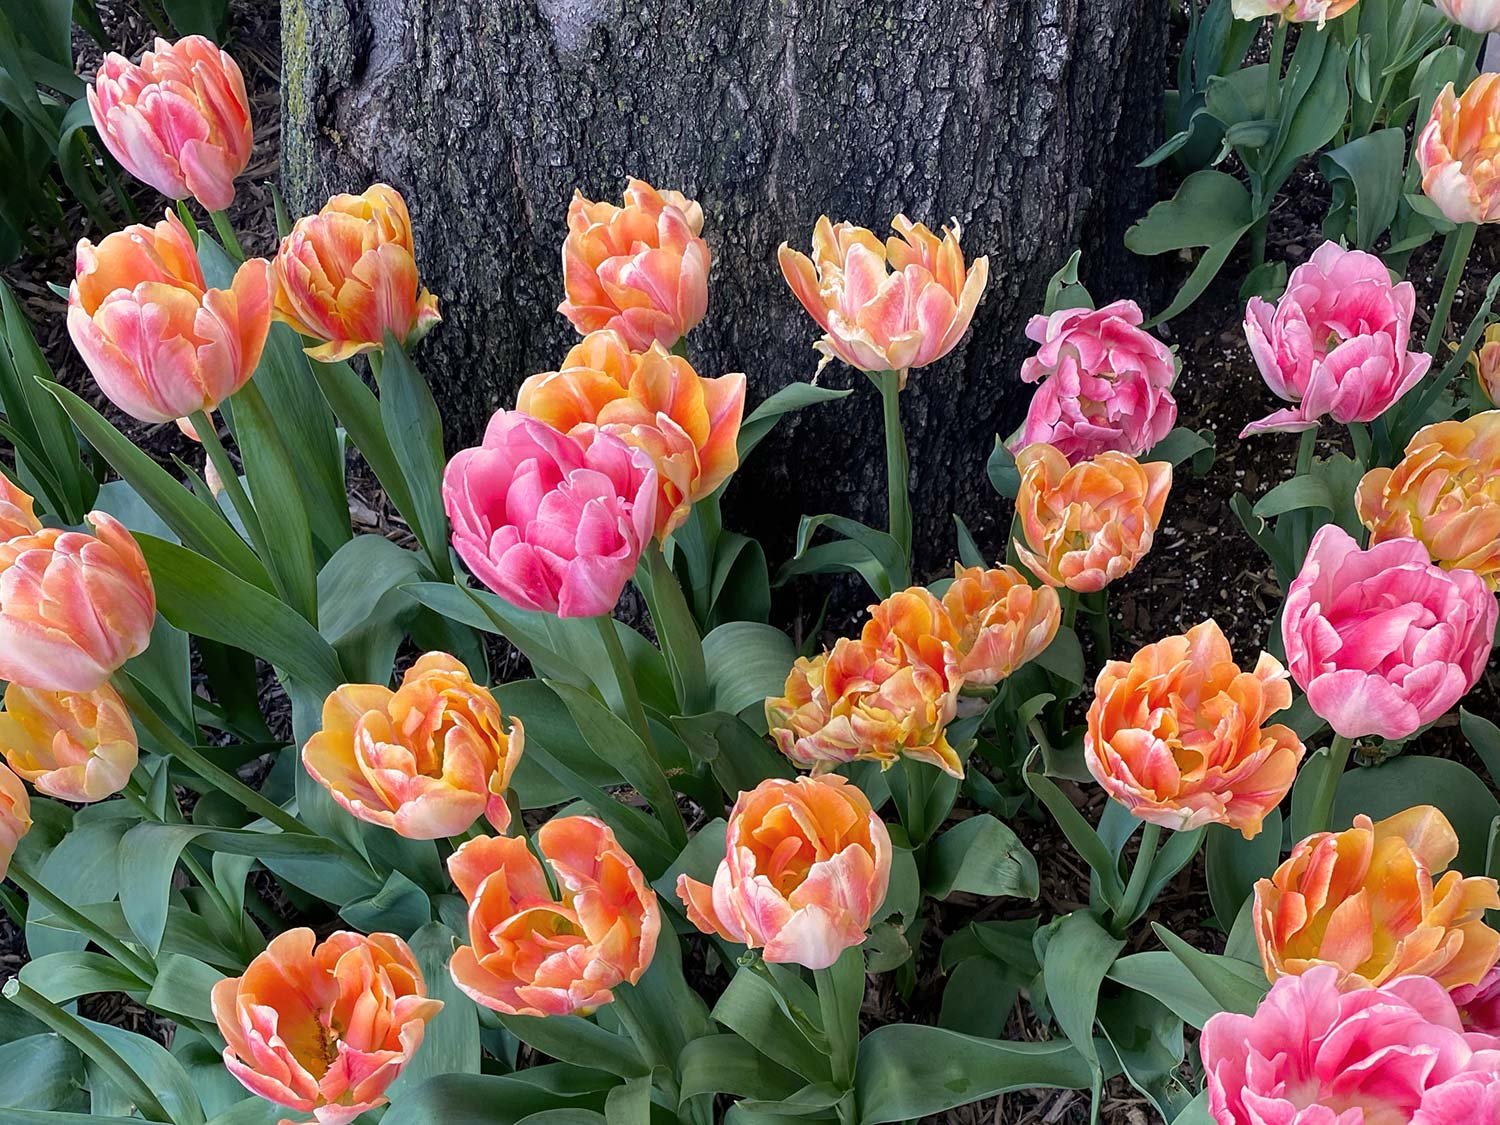 nature-closeup-of-pink-and-orange-tulips-by-tree.jpg